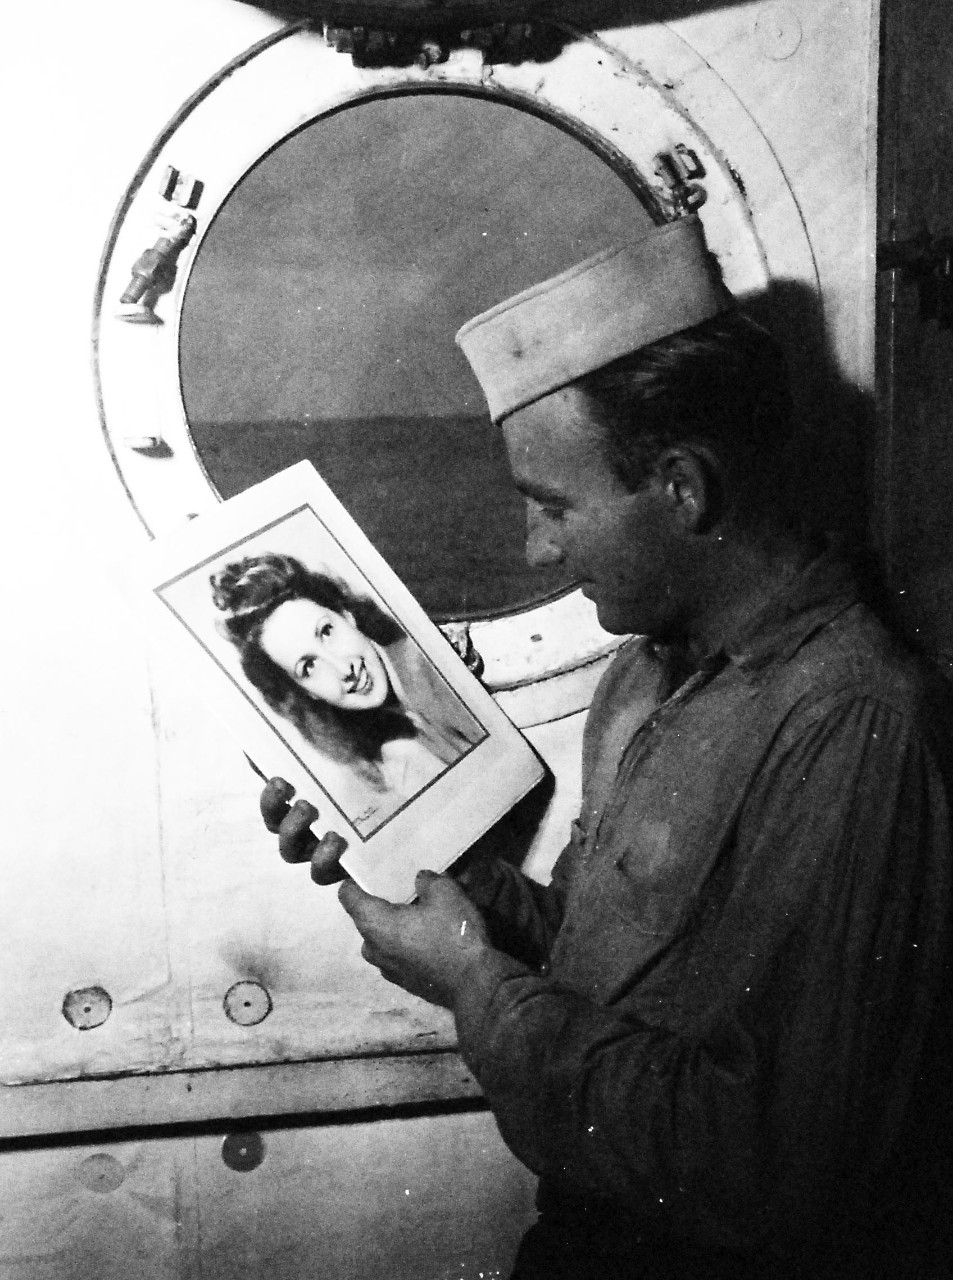 80-G-354678:  V-J Day, August 15, 1945.    Richard Chaldu S1/C aboard USS Ticonderoga (CV-14) kissed the picture of his wife when he heard the news of V-J Day.   Photographed by PhoM3/c J.D. McGhie.    Photographed August 15, 1945.  Official U.S. Navy photograph, now in the collections of the National Archives.  (2016/06/21).